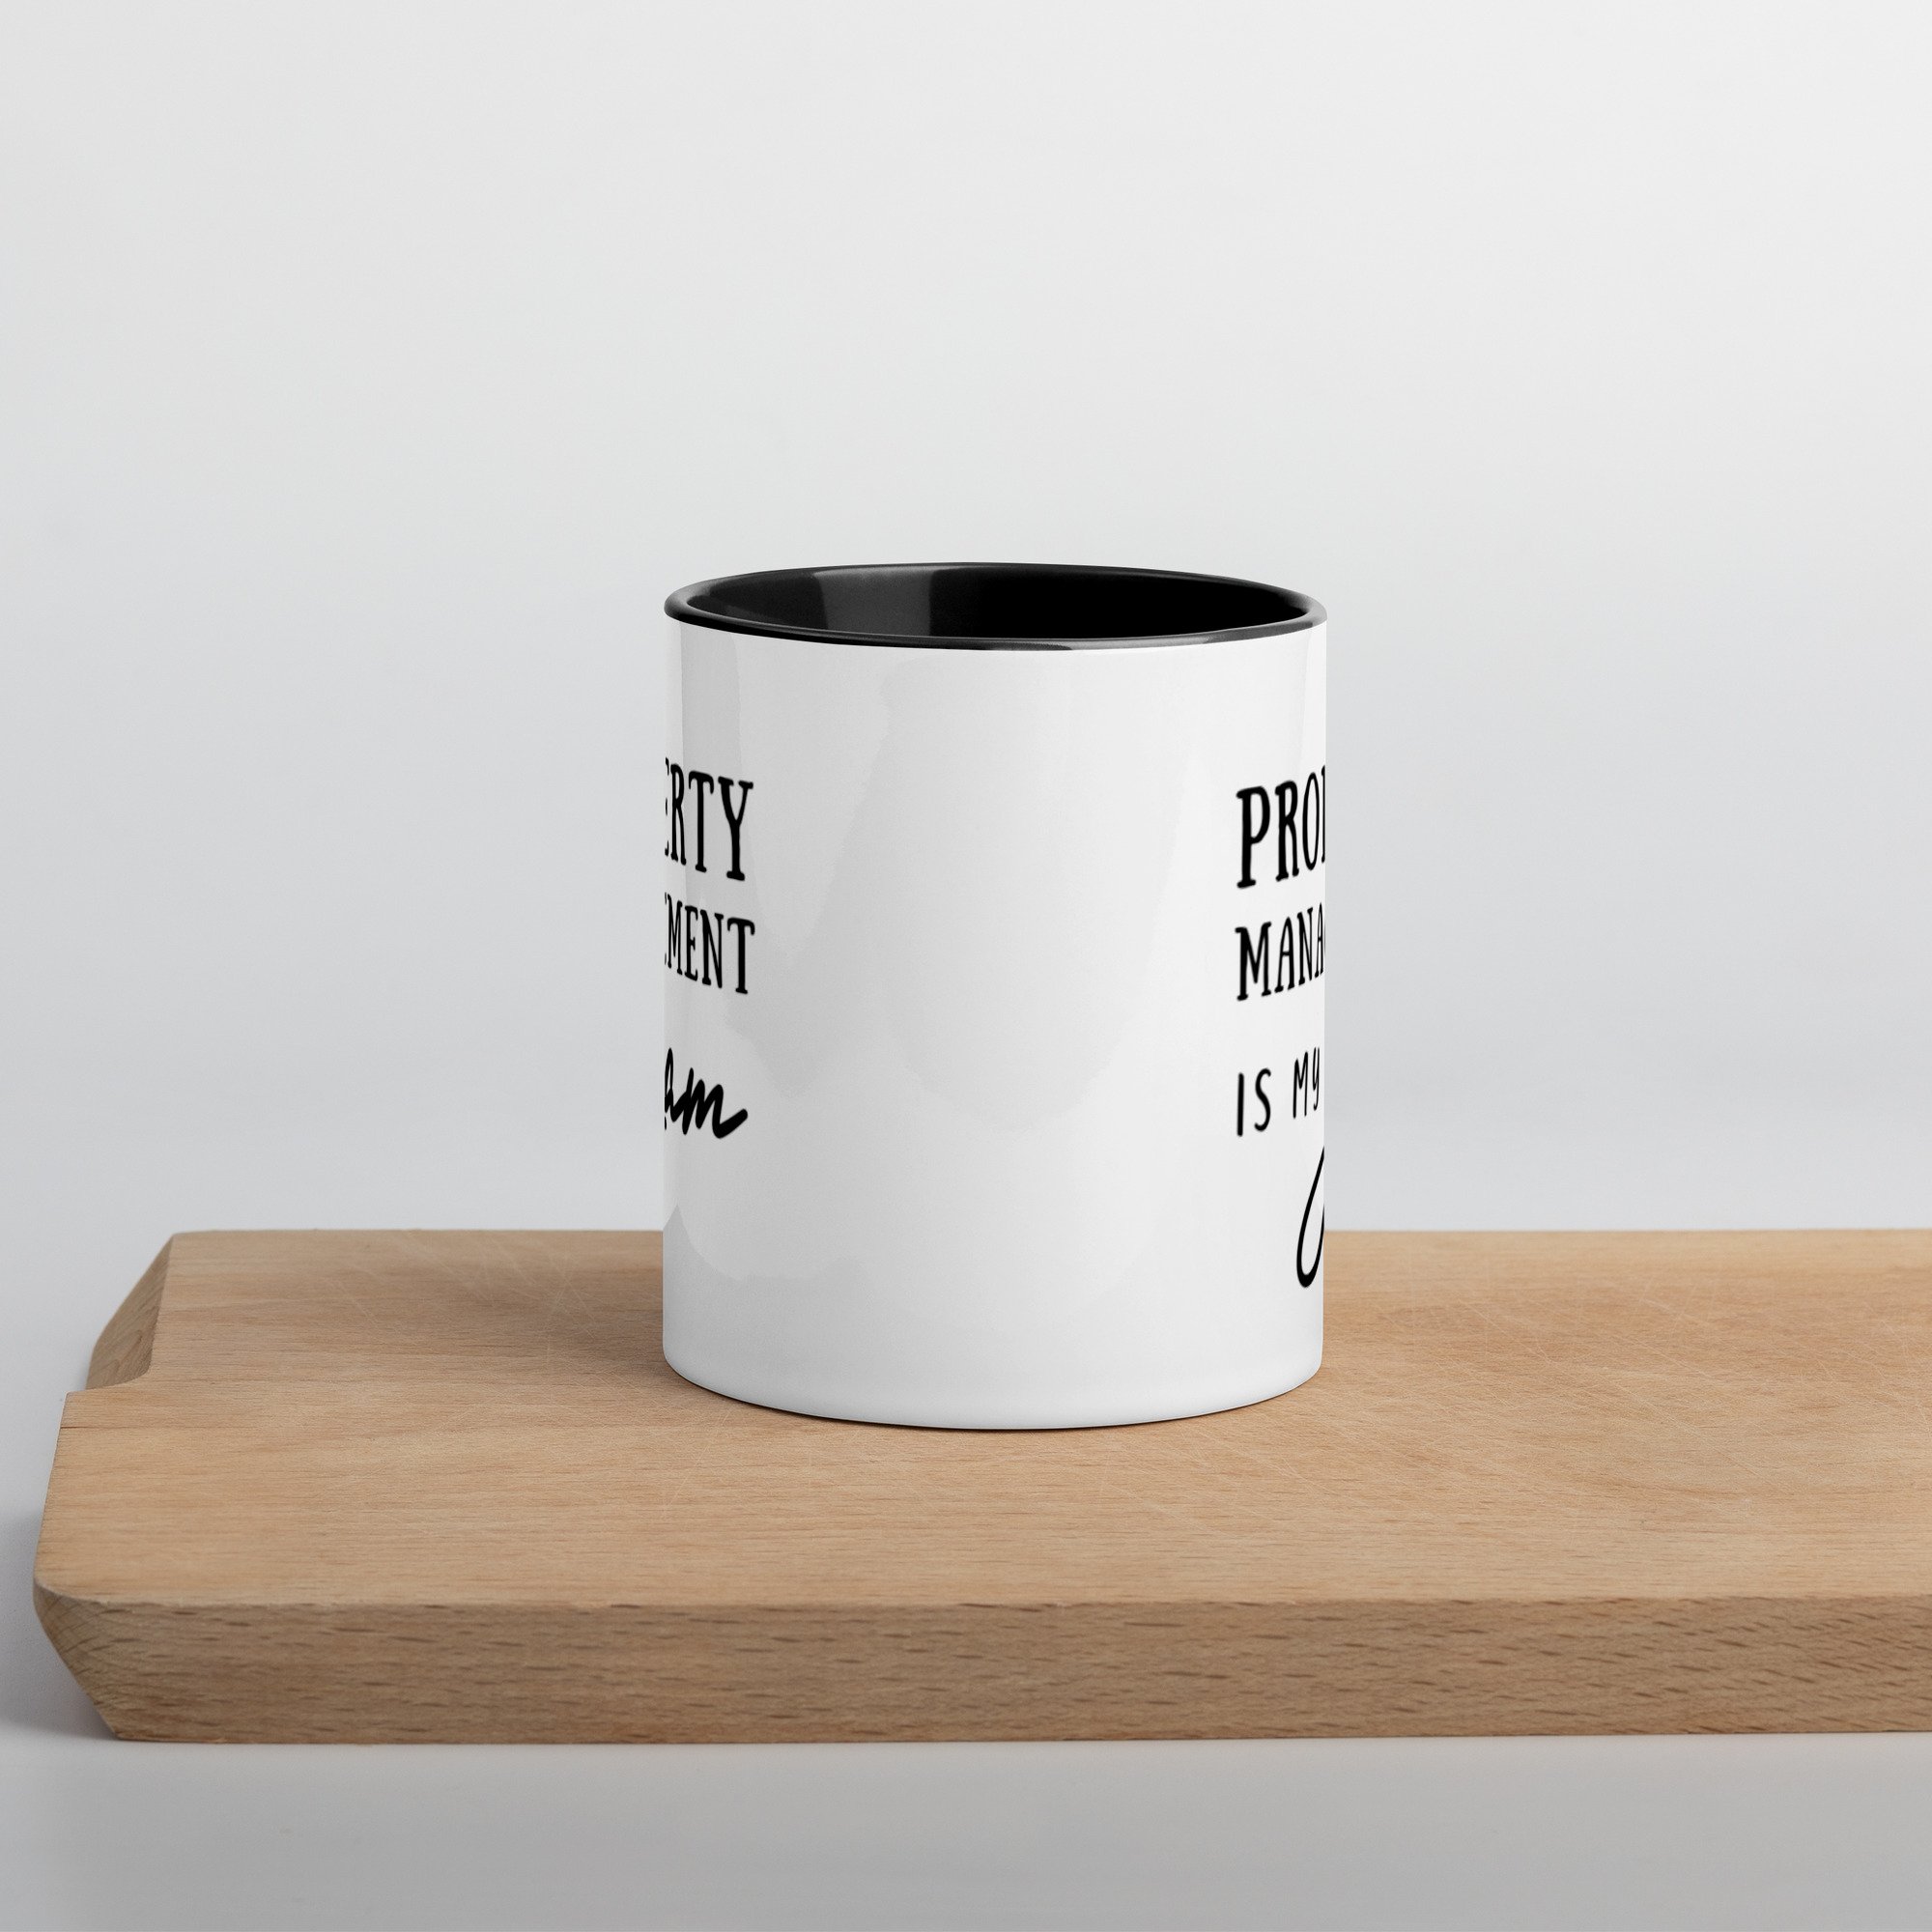 Property Management Is My Jam Mug - The Perfect Gift for Property